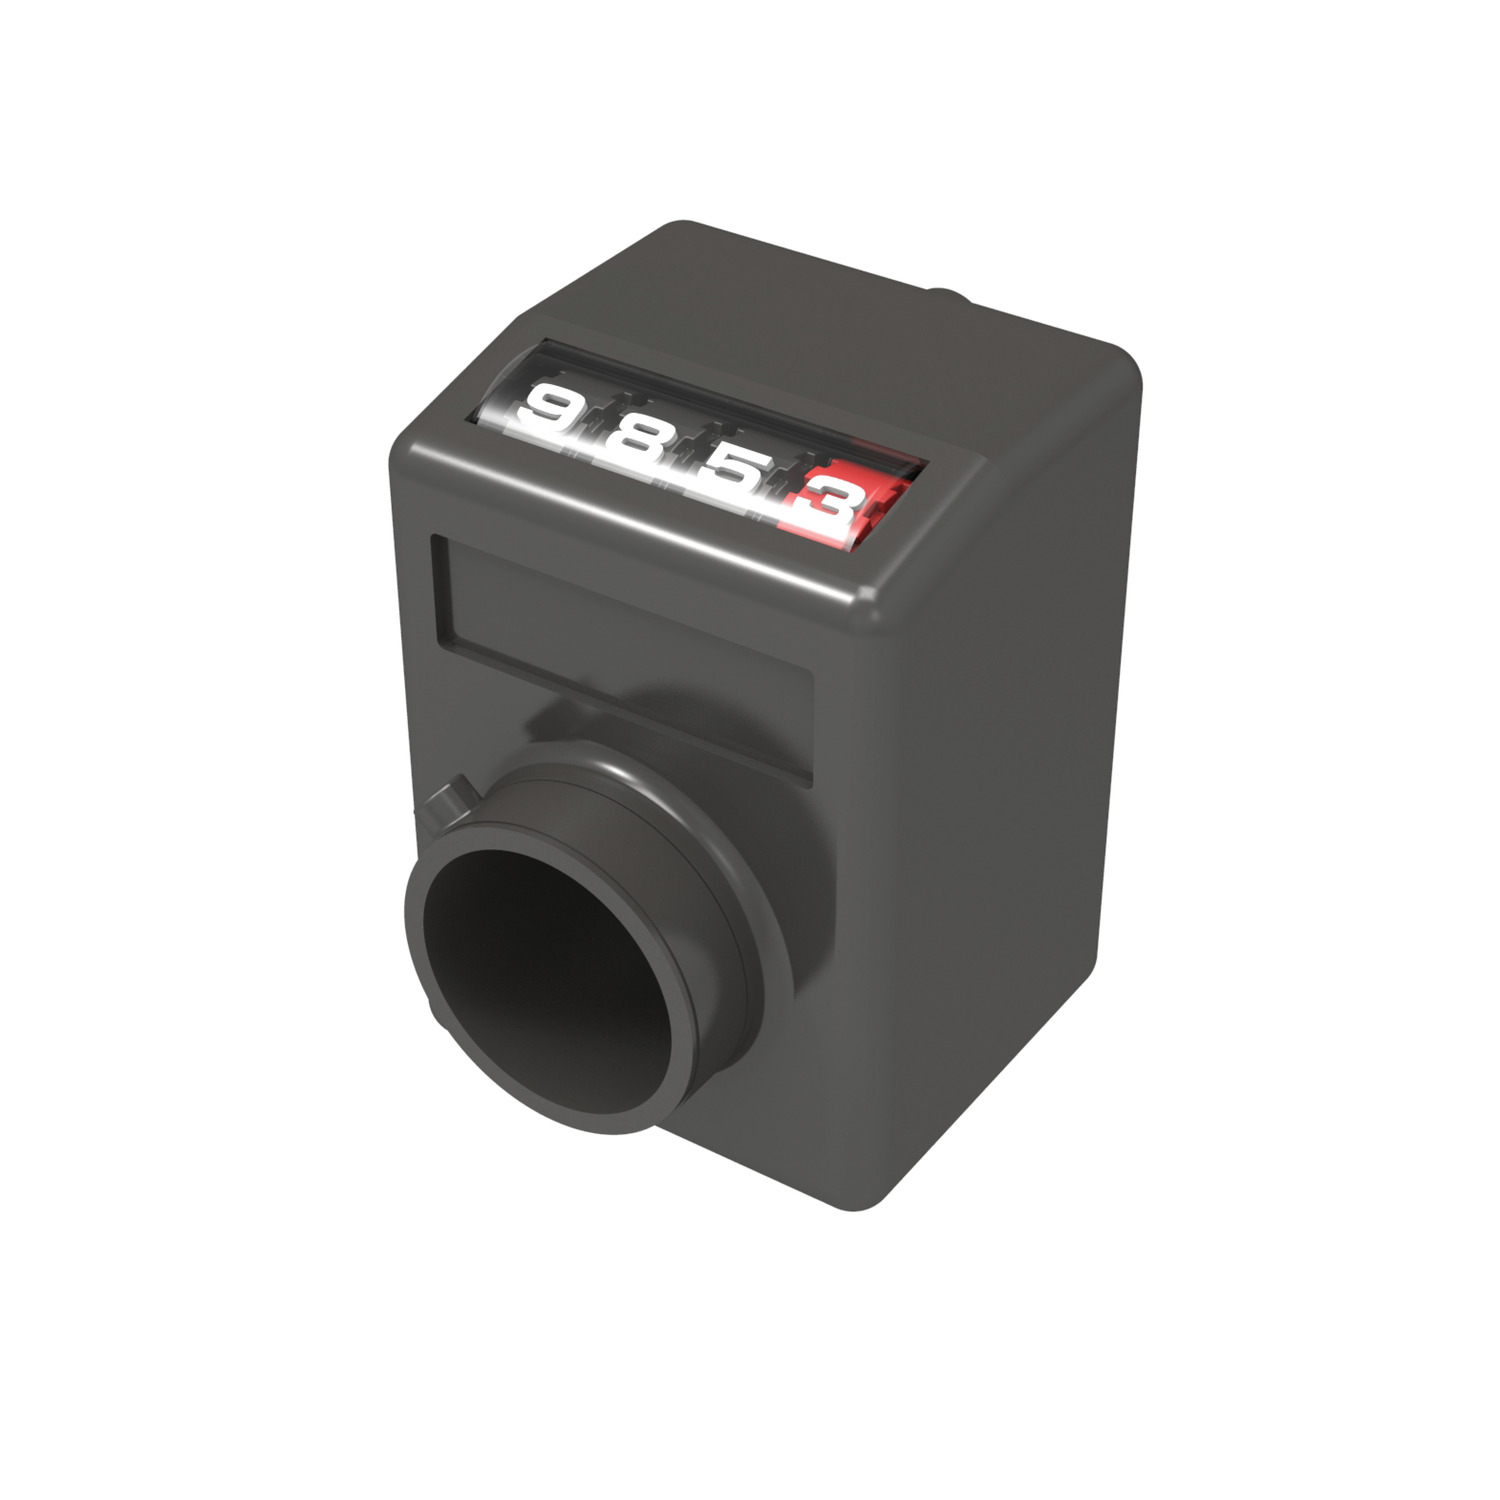 Product L1470, Position Counters 4 digit display / 